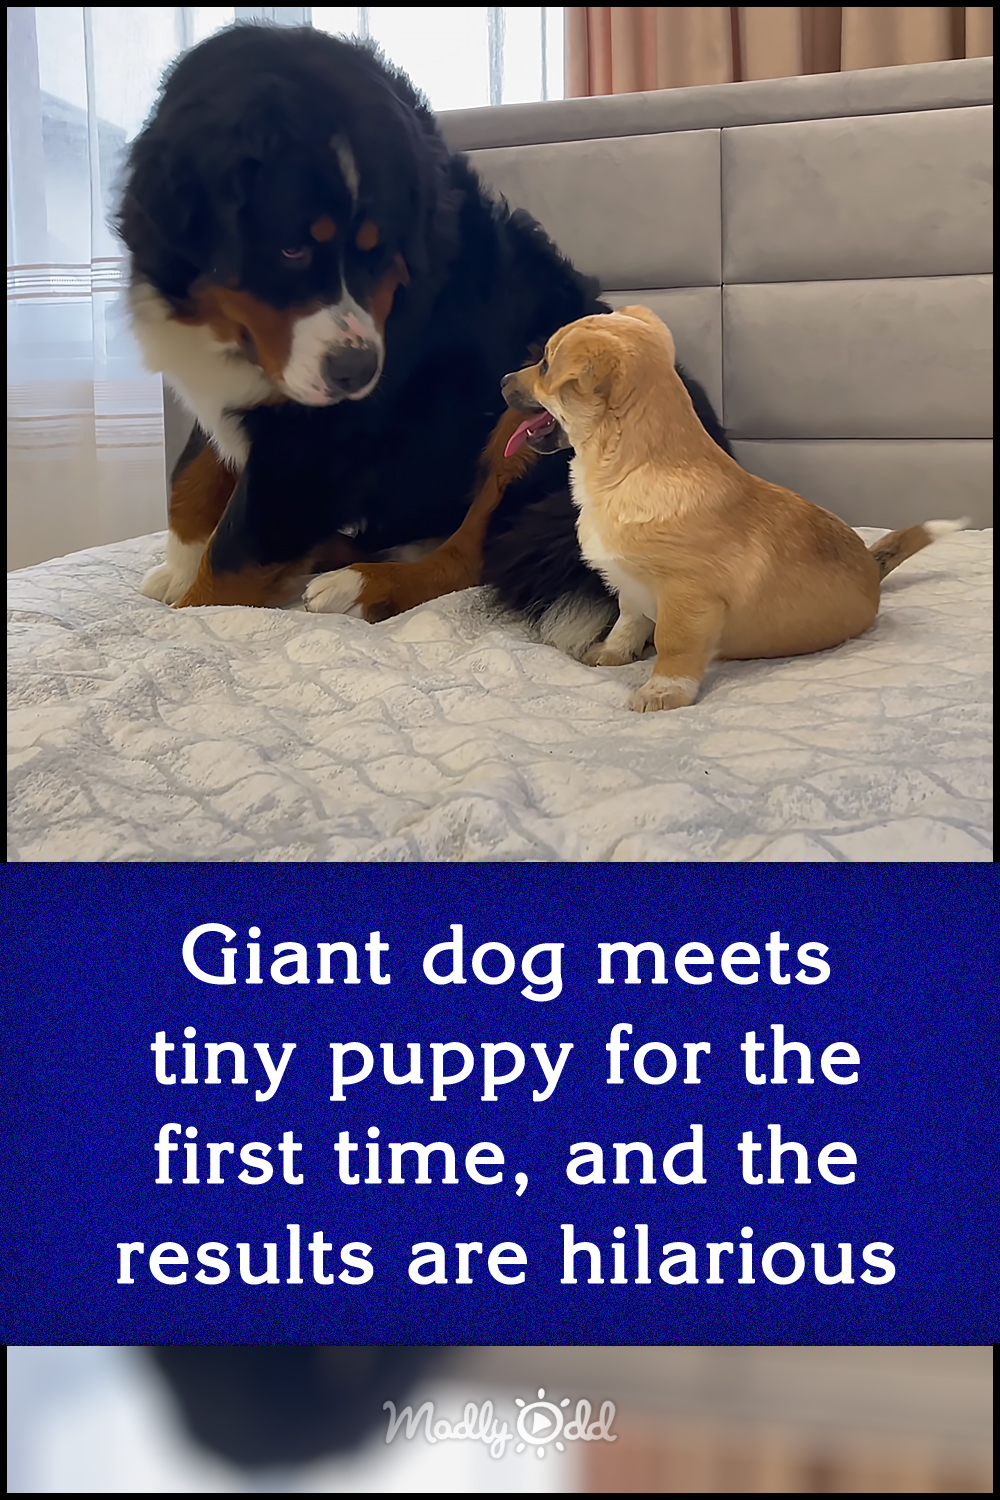 Giant dog meets tiny puppy for the first time, and the results are hilarious